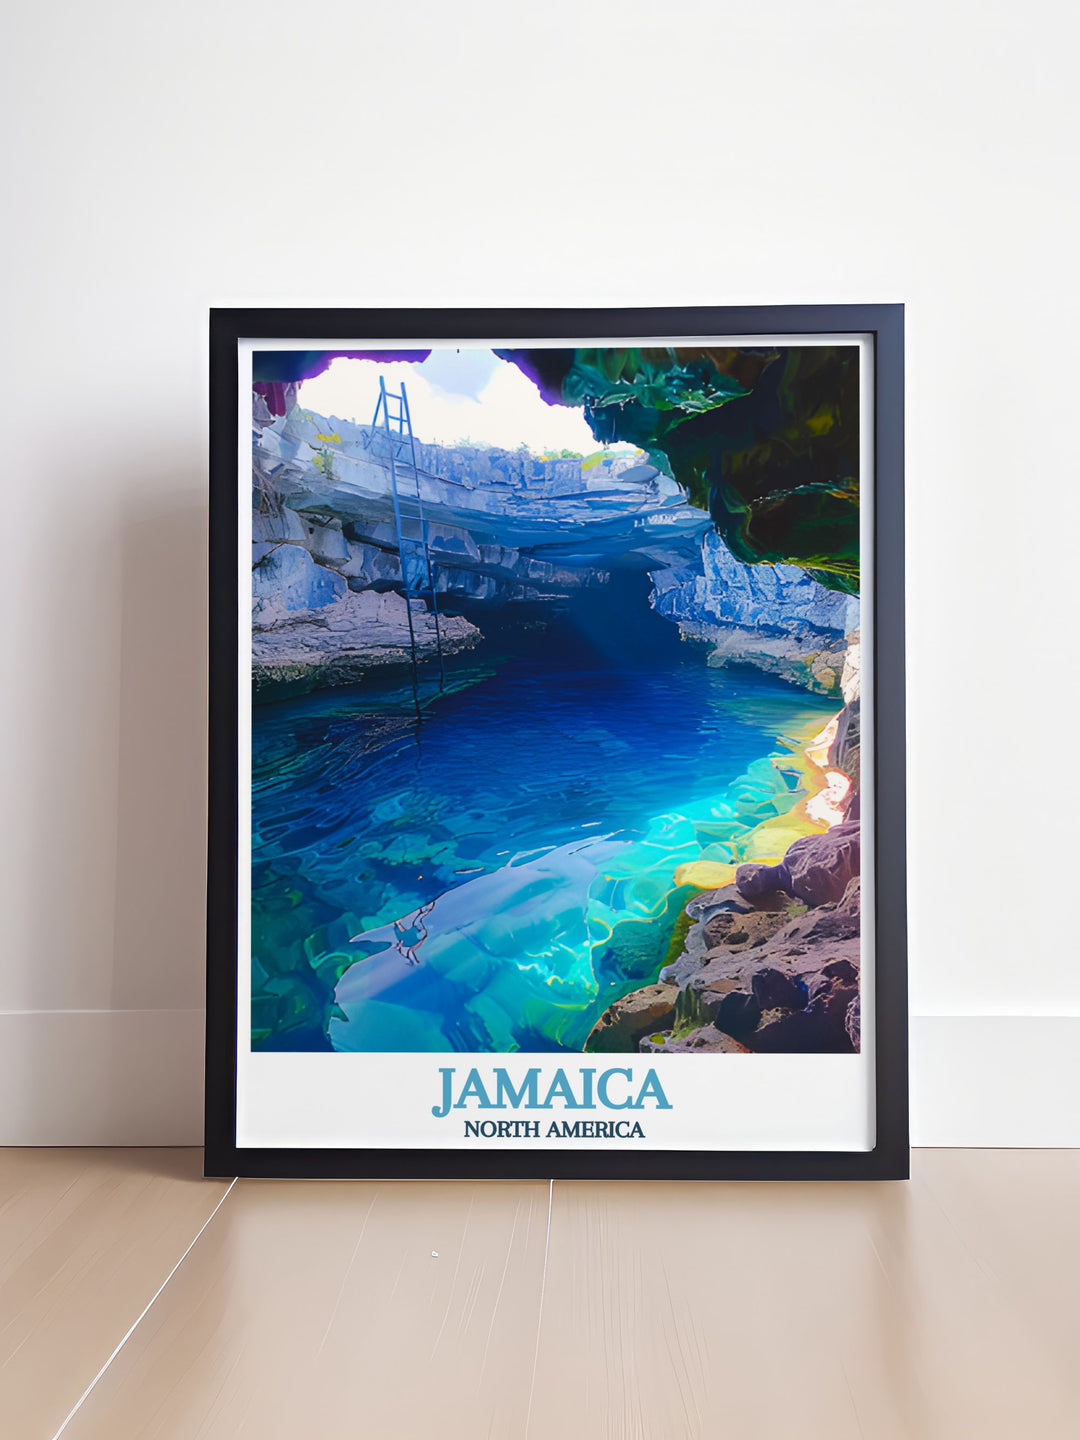 The vibrant colors and detailed scenery of the Blue Hole Mineral Spring are beautifully captured in this poster, celebrating the natural wonders of Jamaica.